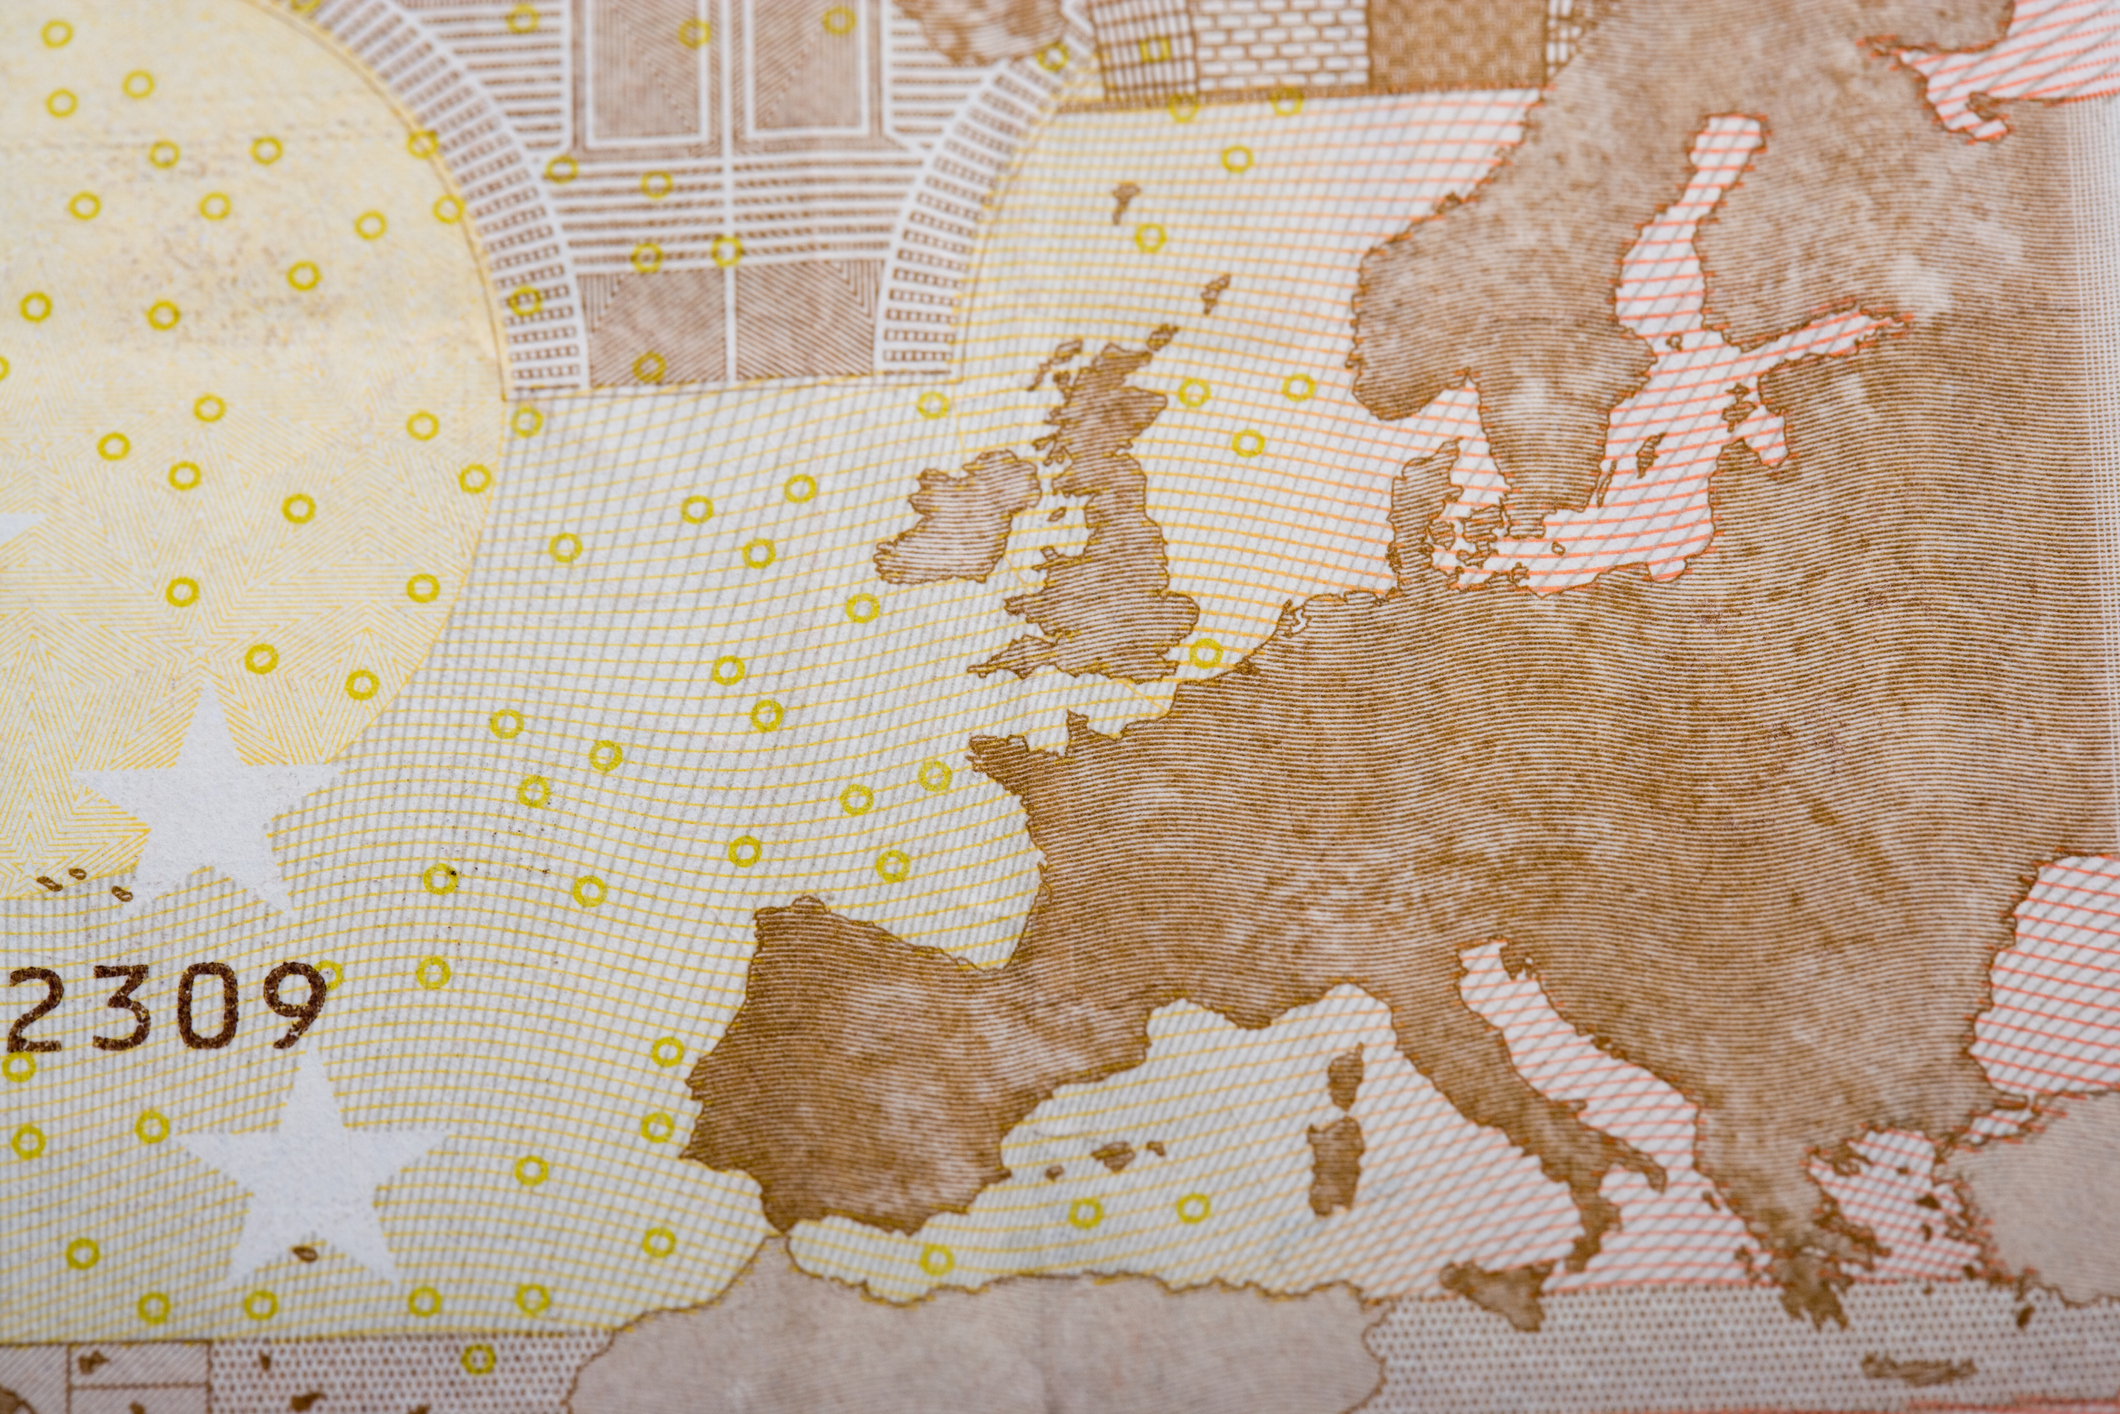 Detail of Euro note showing European continent